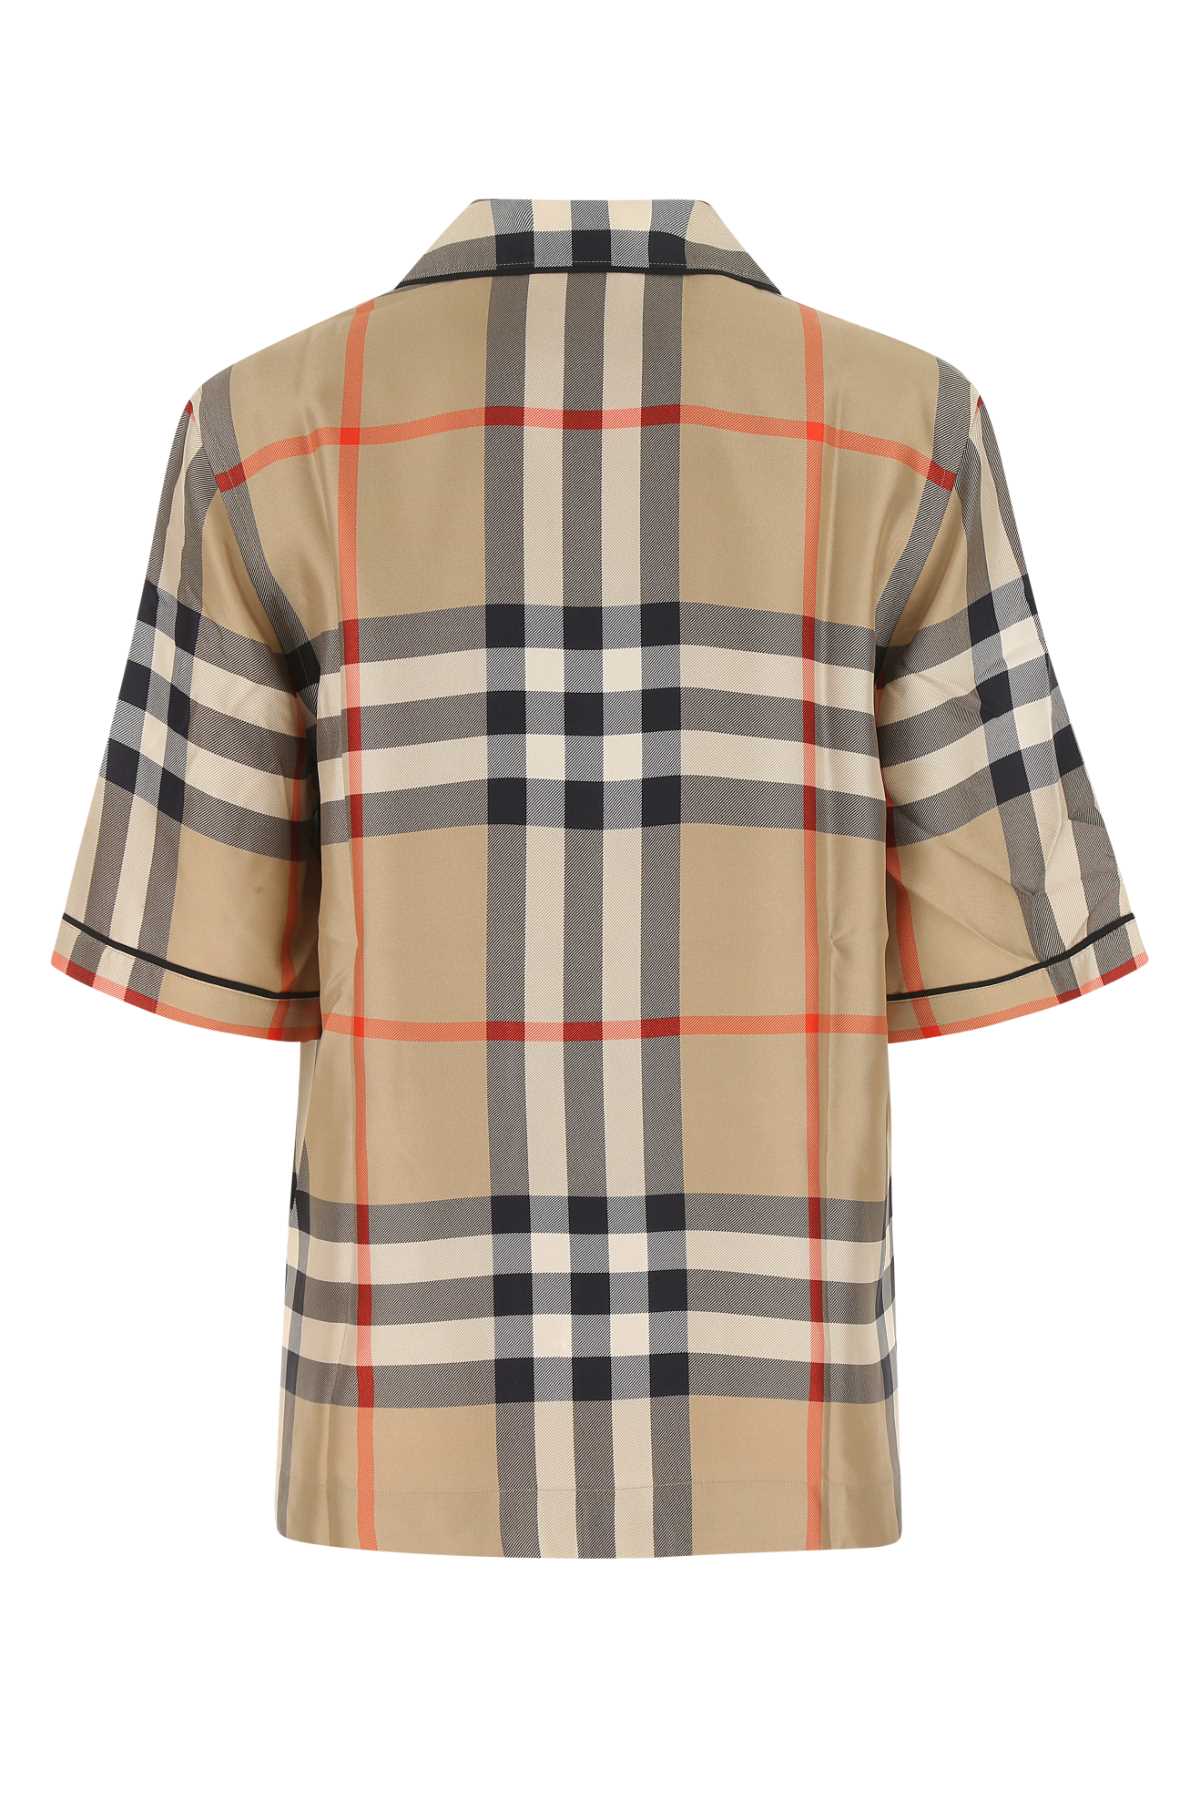 Burberry Printed Satin Shirt In A7028